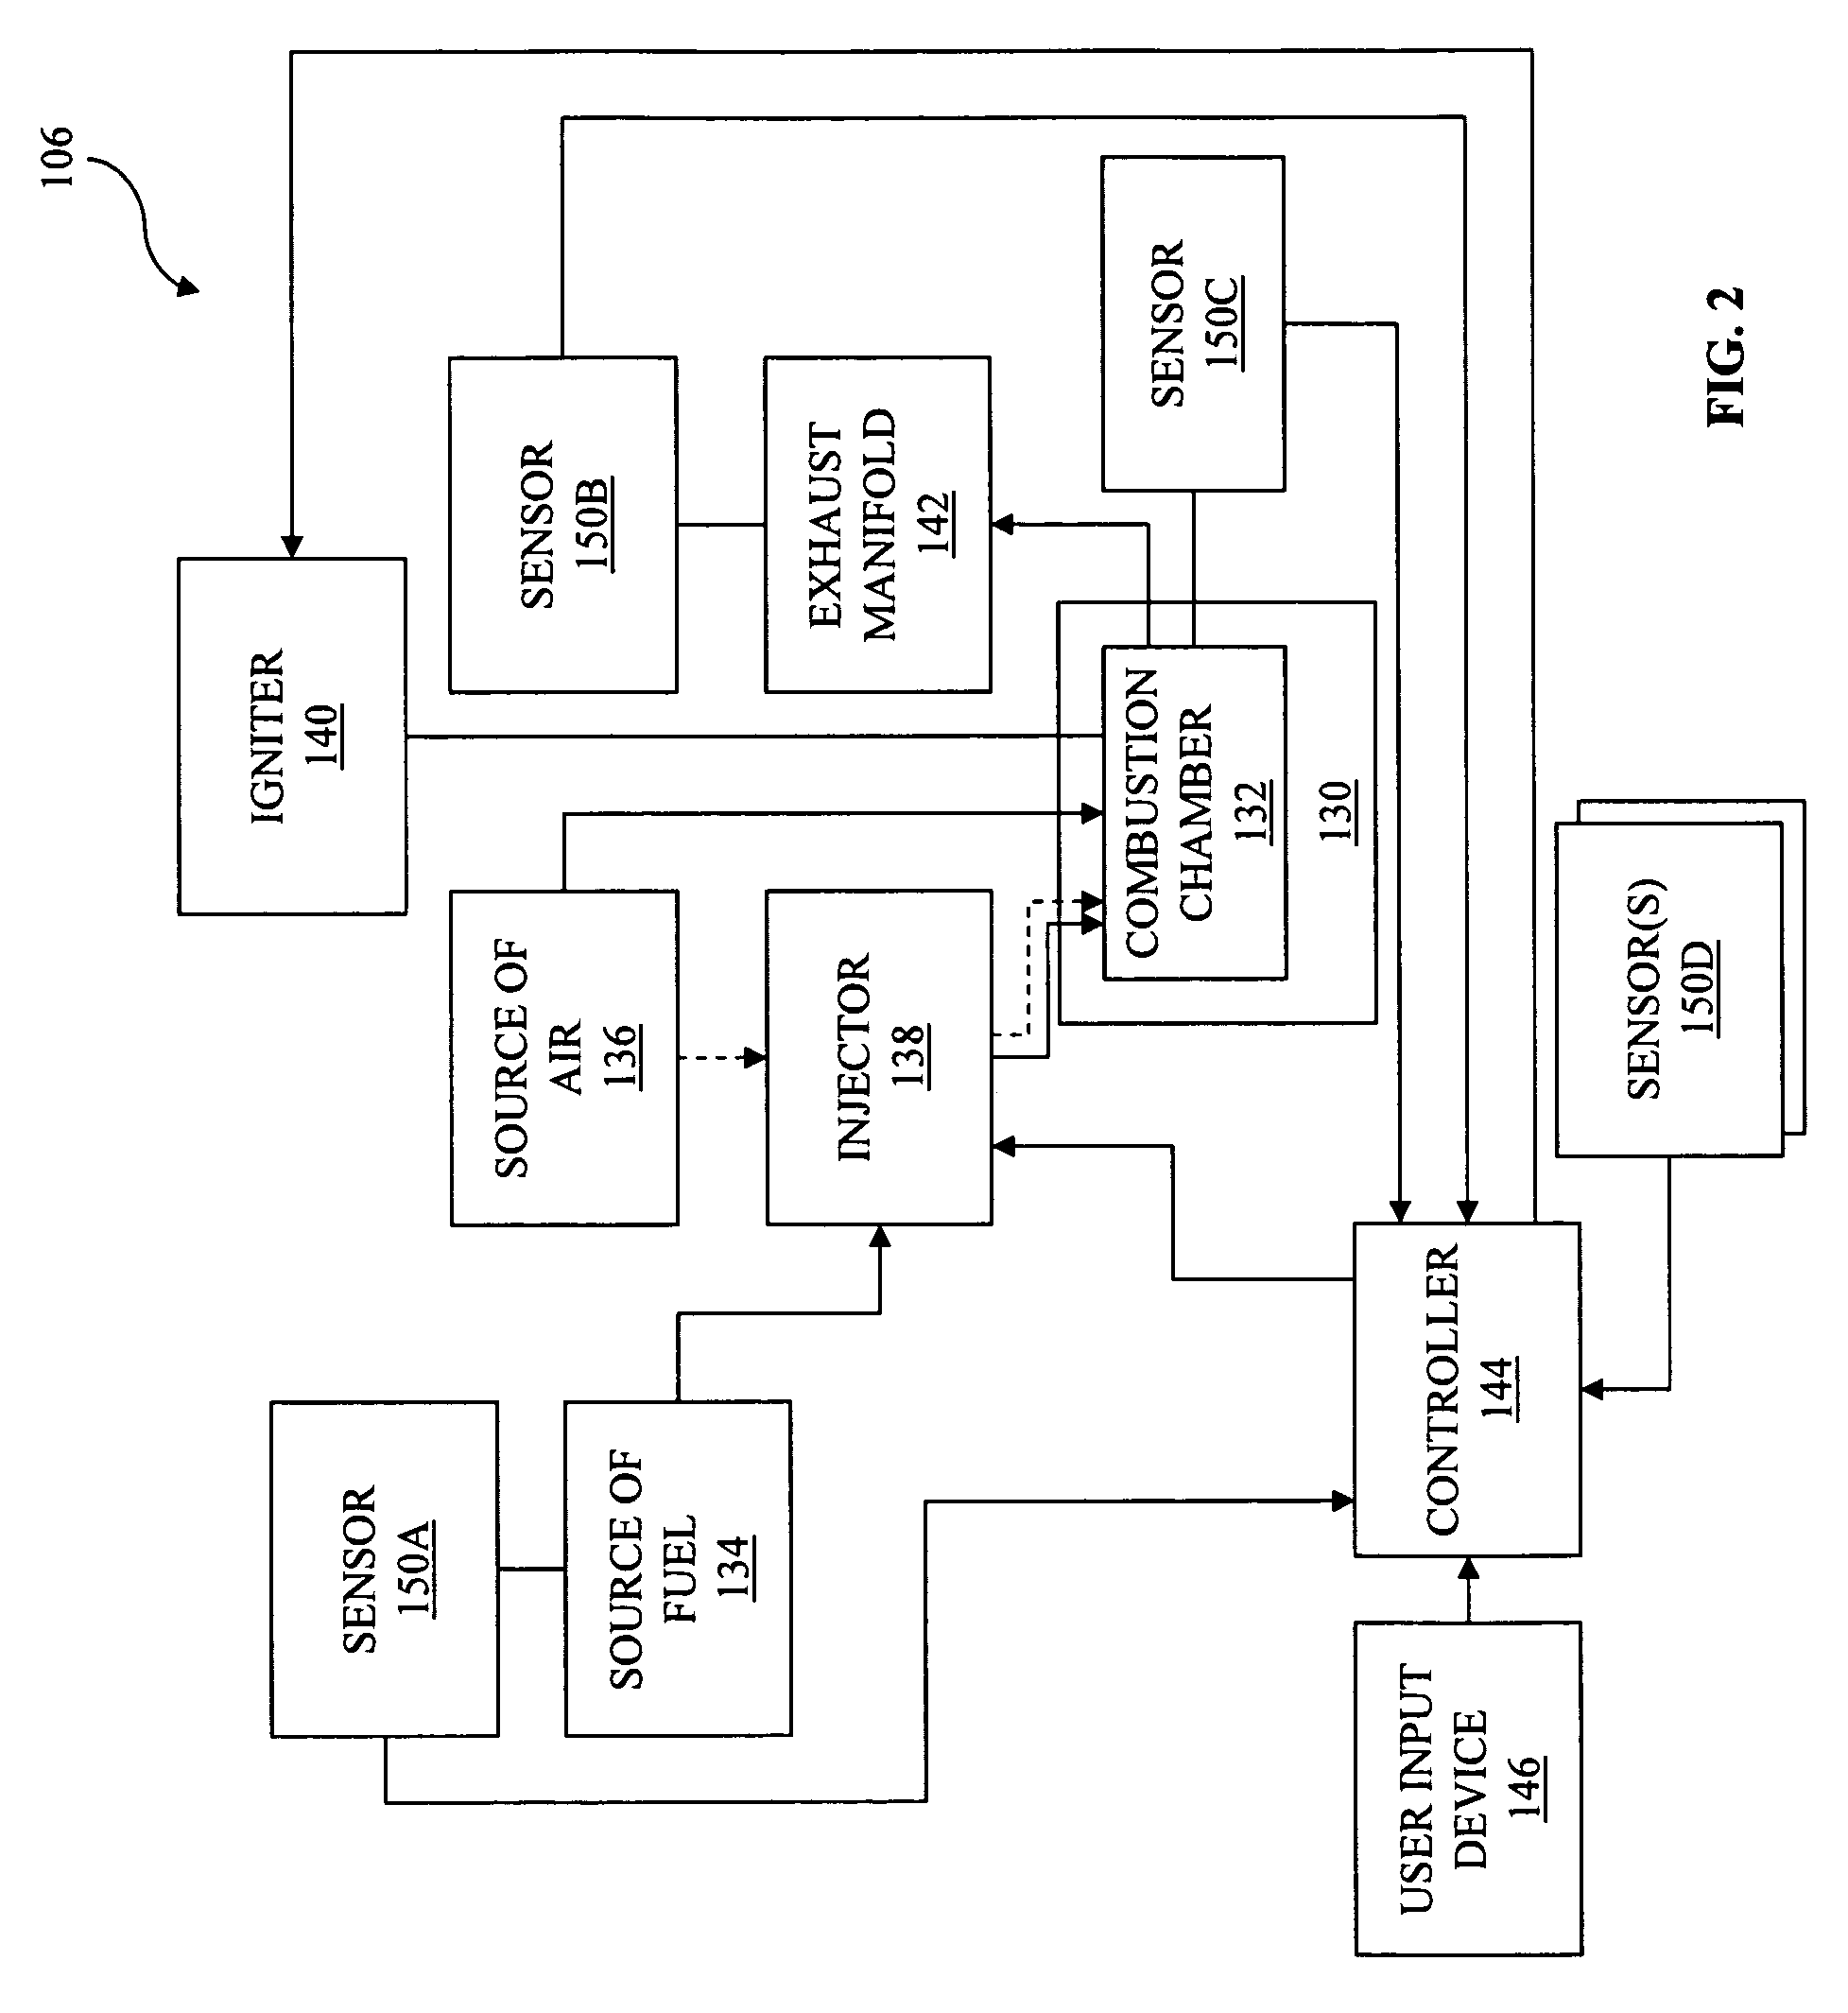 Method and operation of an engine